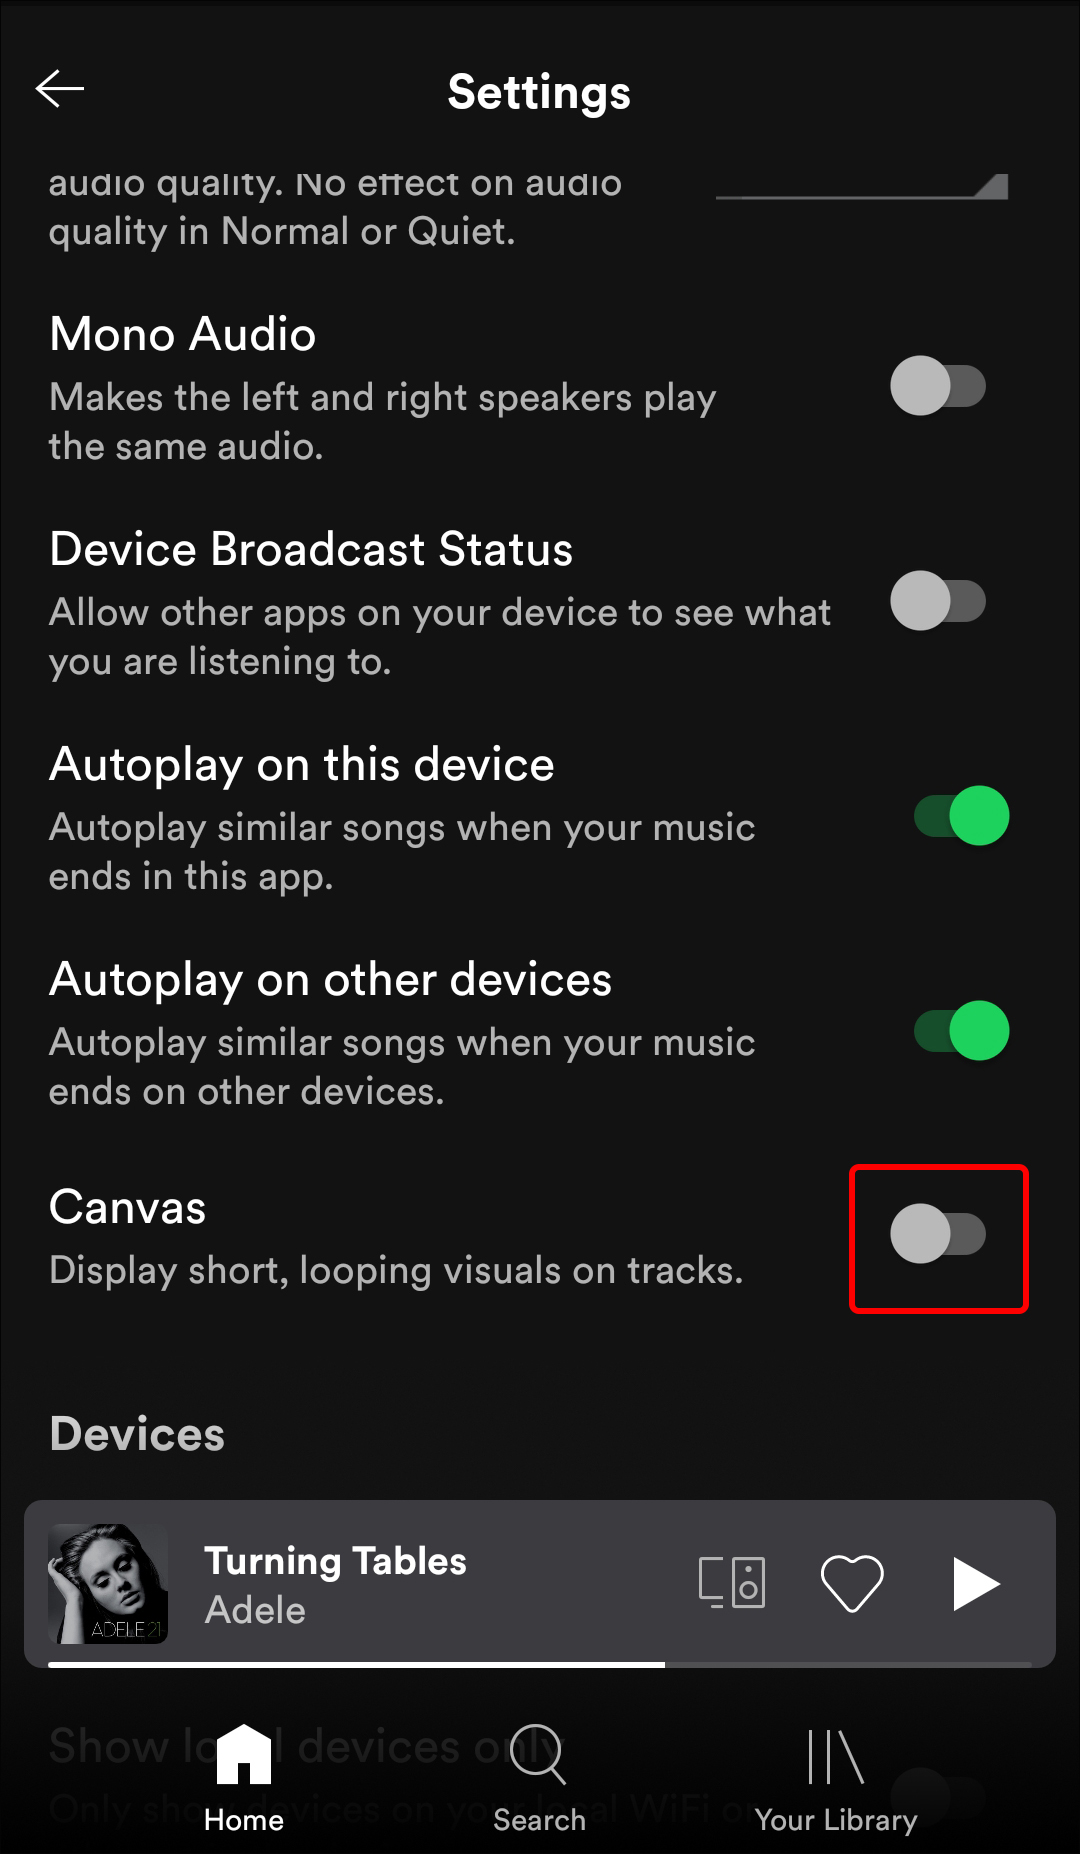 How to Turn On or Off Canvas in Spotify